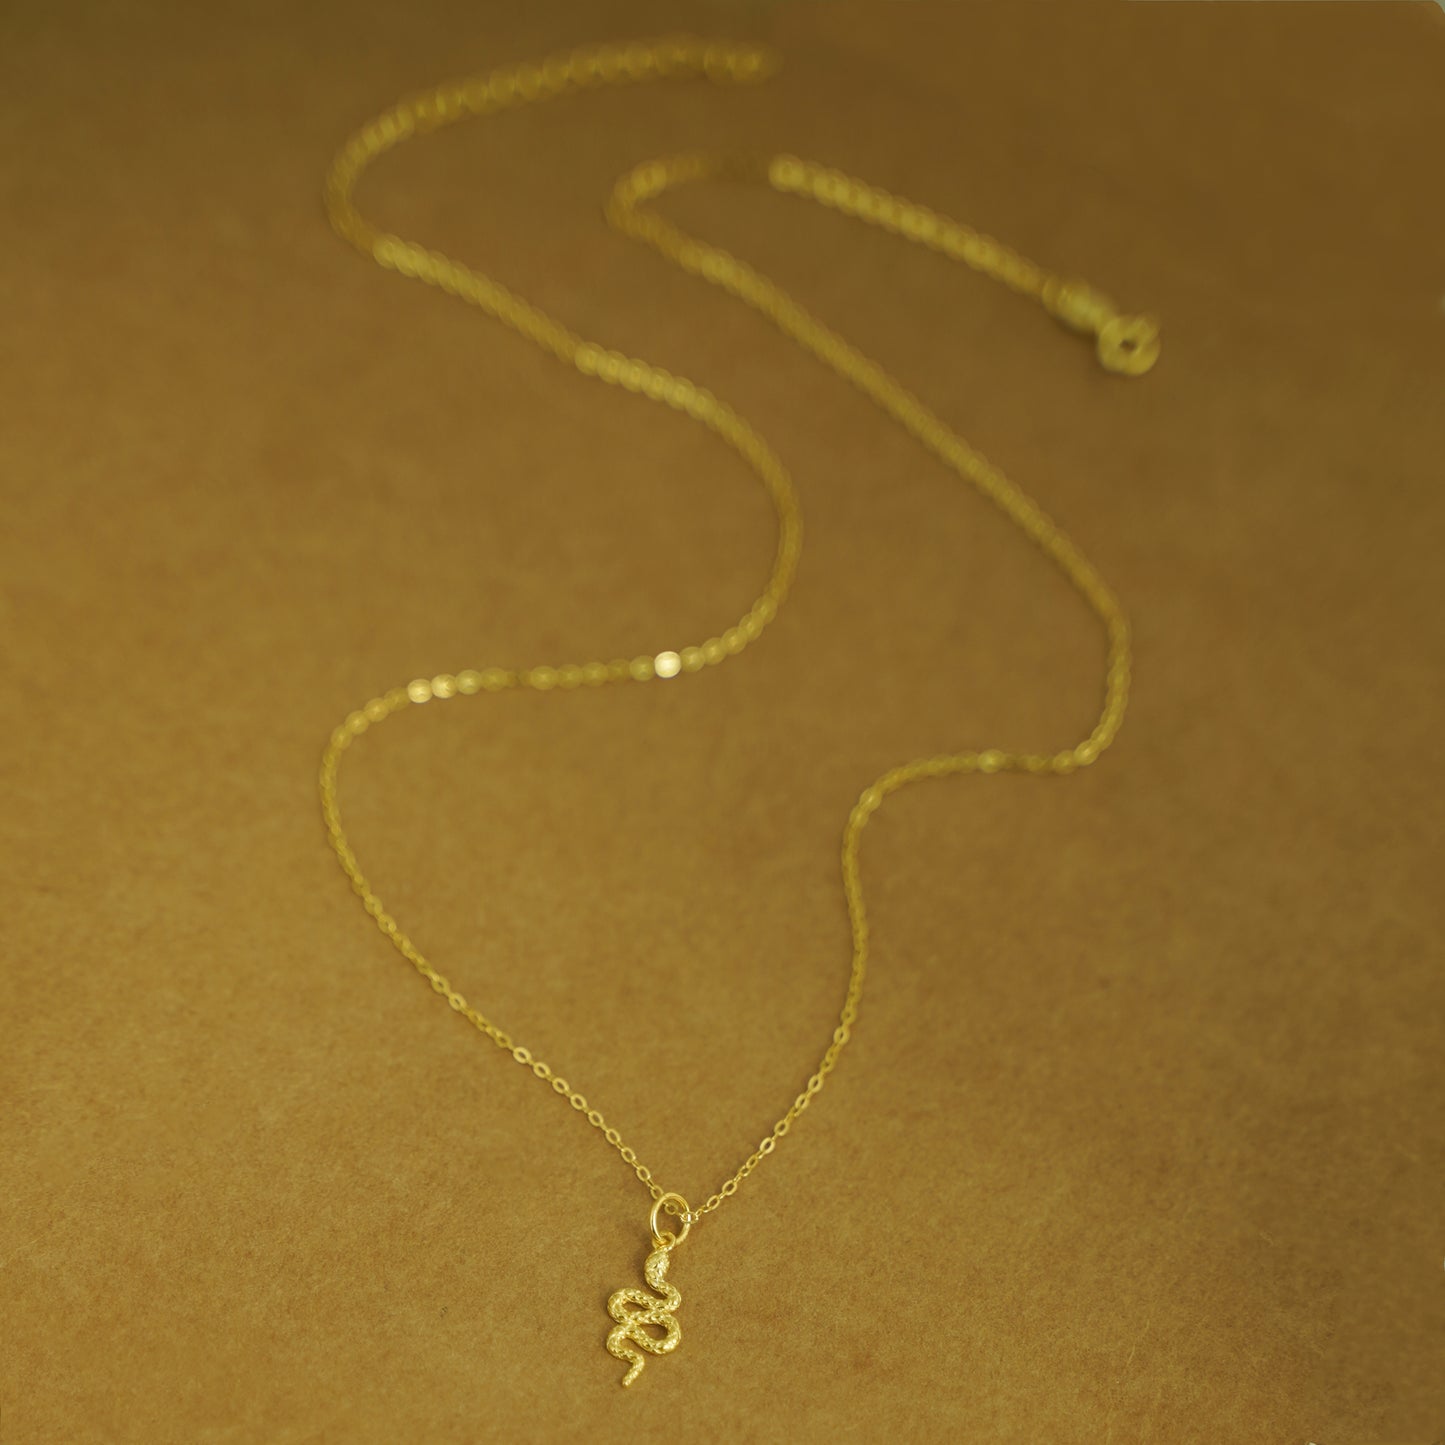 Sterling Silver Snake Pendant in 2 Tones of Rhodium and 18k Gold Plating for Earrings or Necklace - sugarkittenlondon